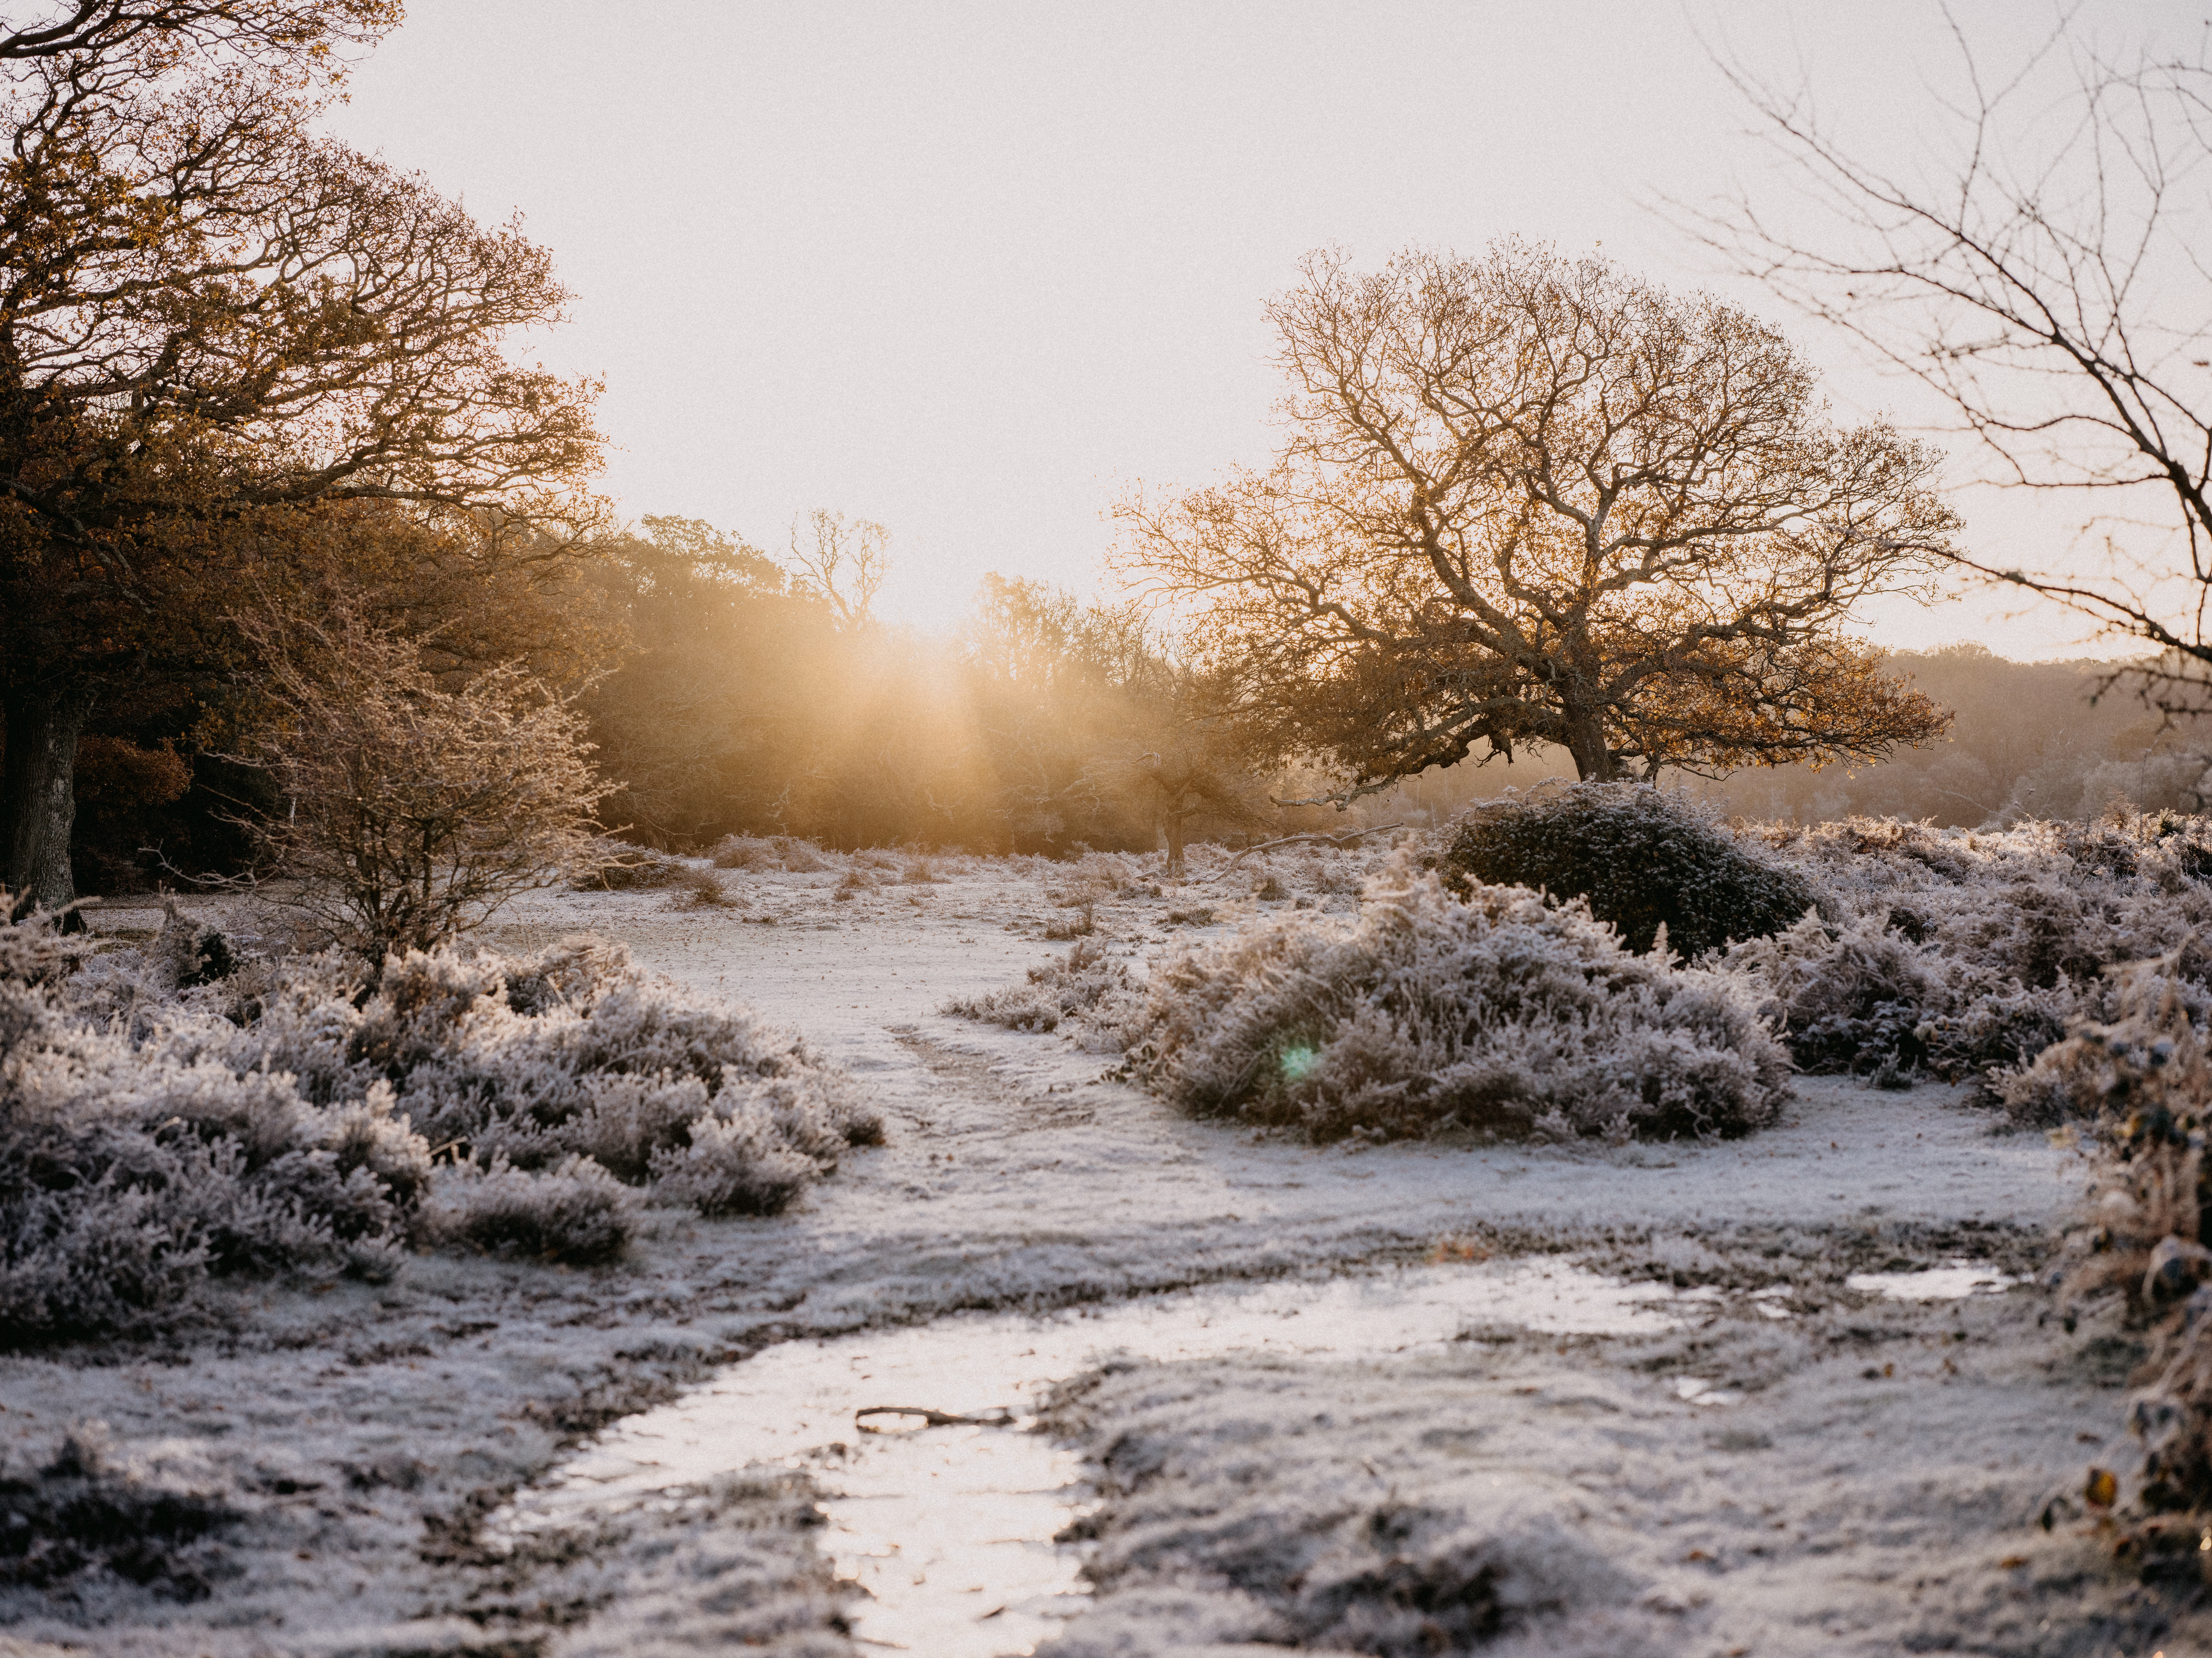 Frosty scene in the countryside